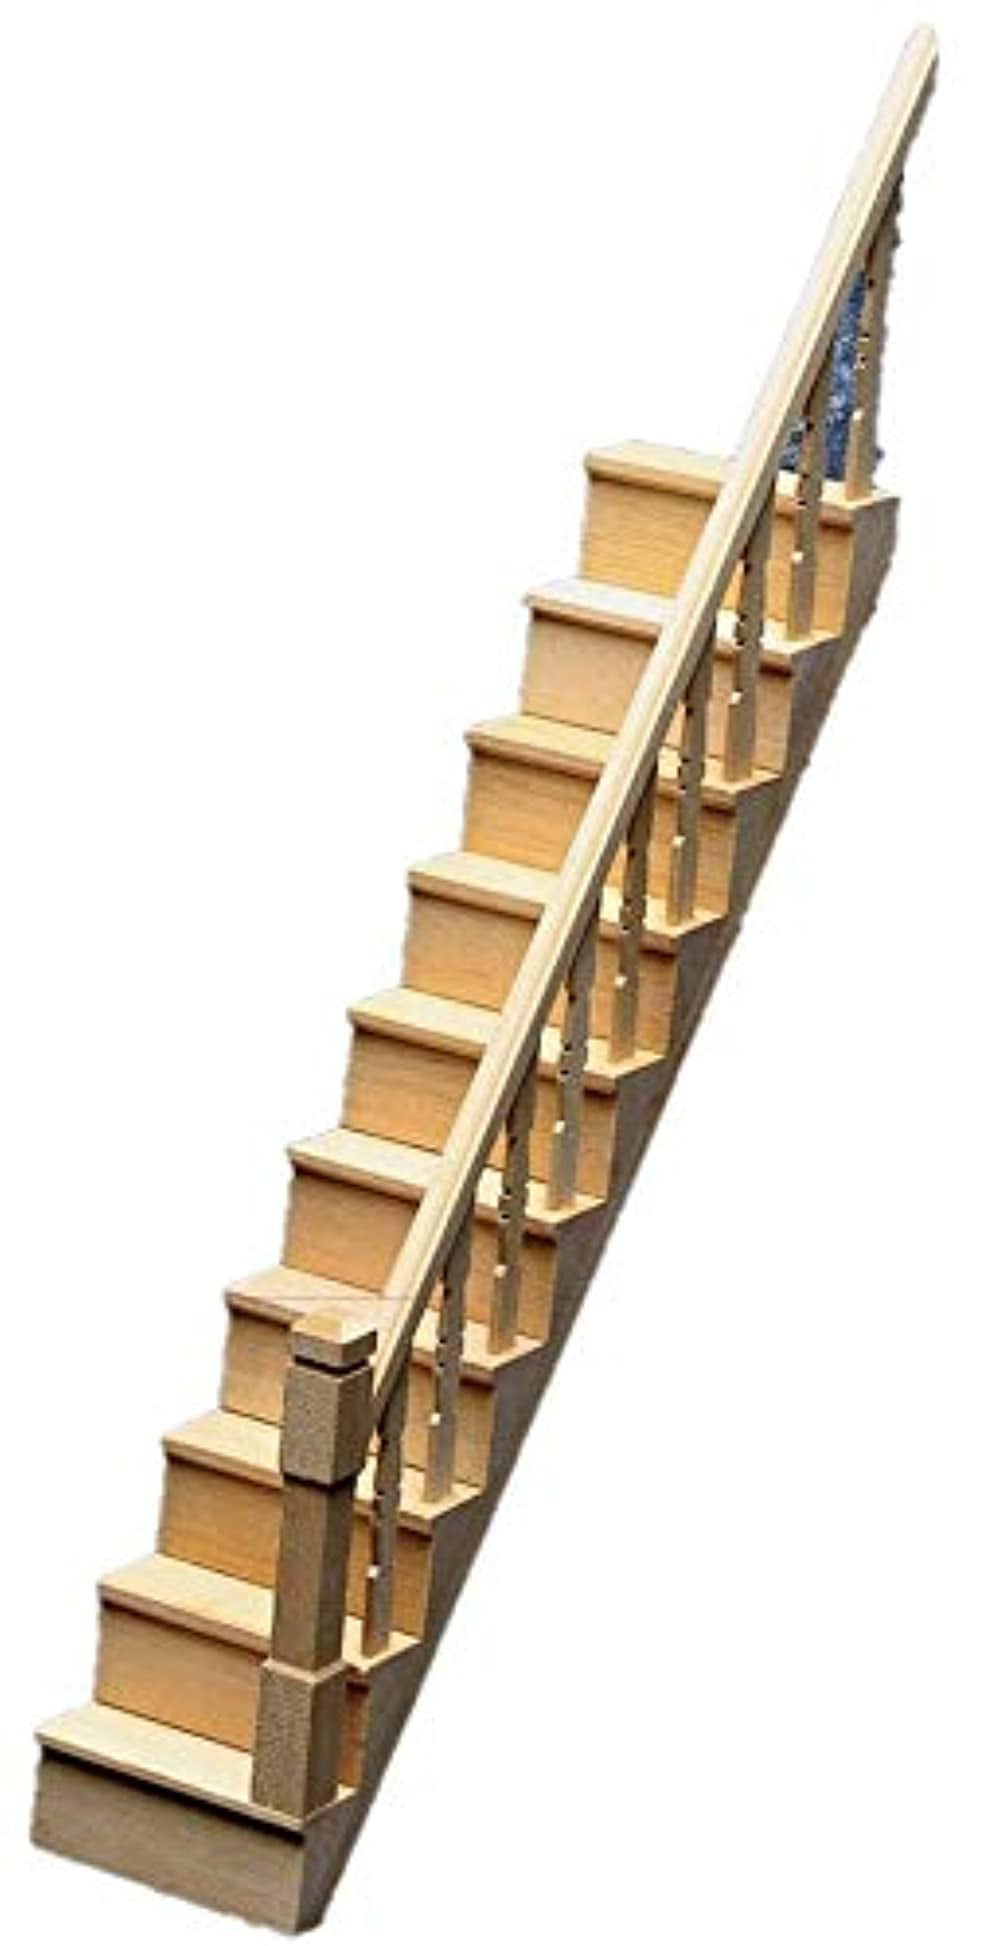 Dolls House Staircase Wooden Stairs with banister Rail each side 